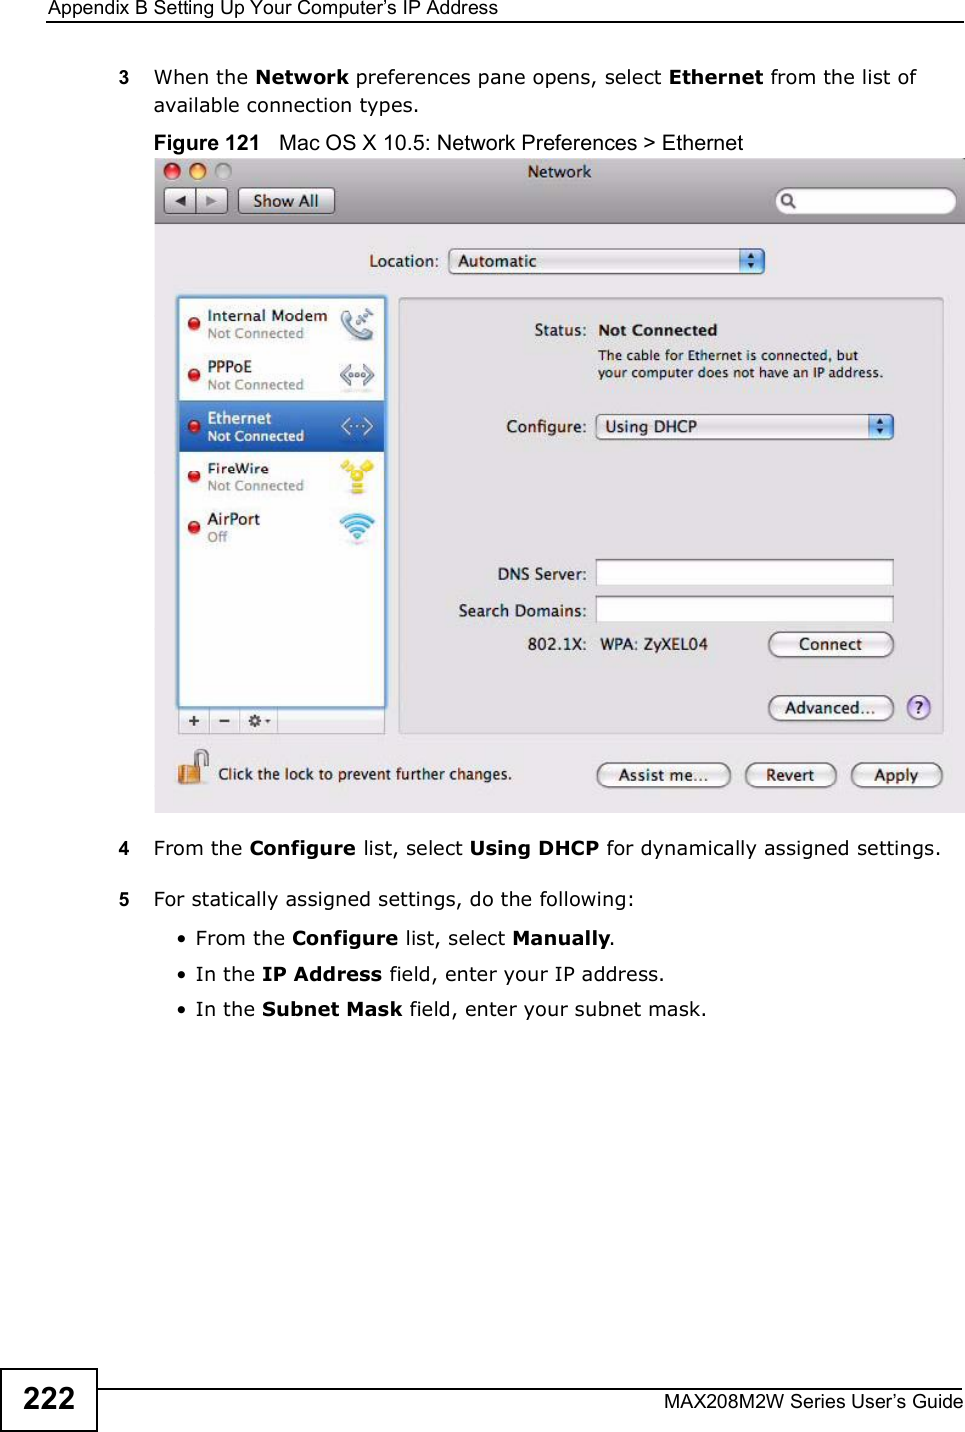 Appendix BSetting Up Your Computer s IP AddressMAX208M2W Series User s Guide2223When the Network preferences pane opens, select Ethernet from the list of available connection types.Figure 121   Mac OS X 10.5: Network Preferences &gt; Ethernet4From the Configure list, select Using DHCP for dynamically assigned settings.5For statically assigned settings, do the following:!From the Configure list, select Manually.!In the IP Address field, enter your IP address.!In the Subnet Mask field, enter your subnet mask.